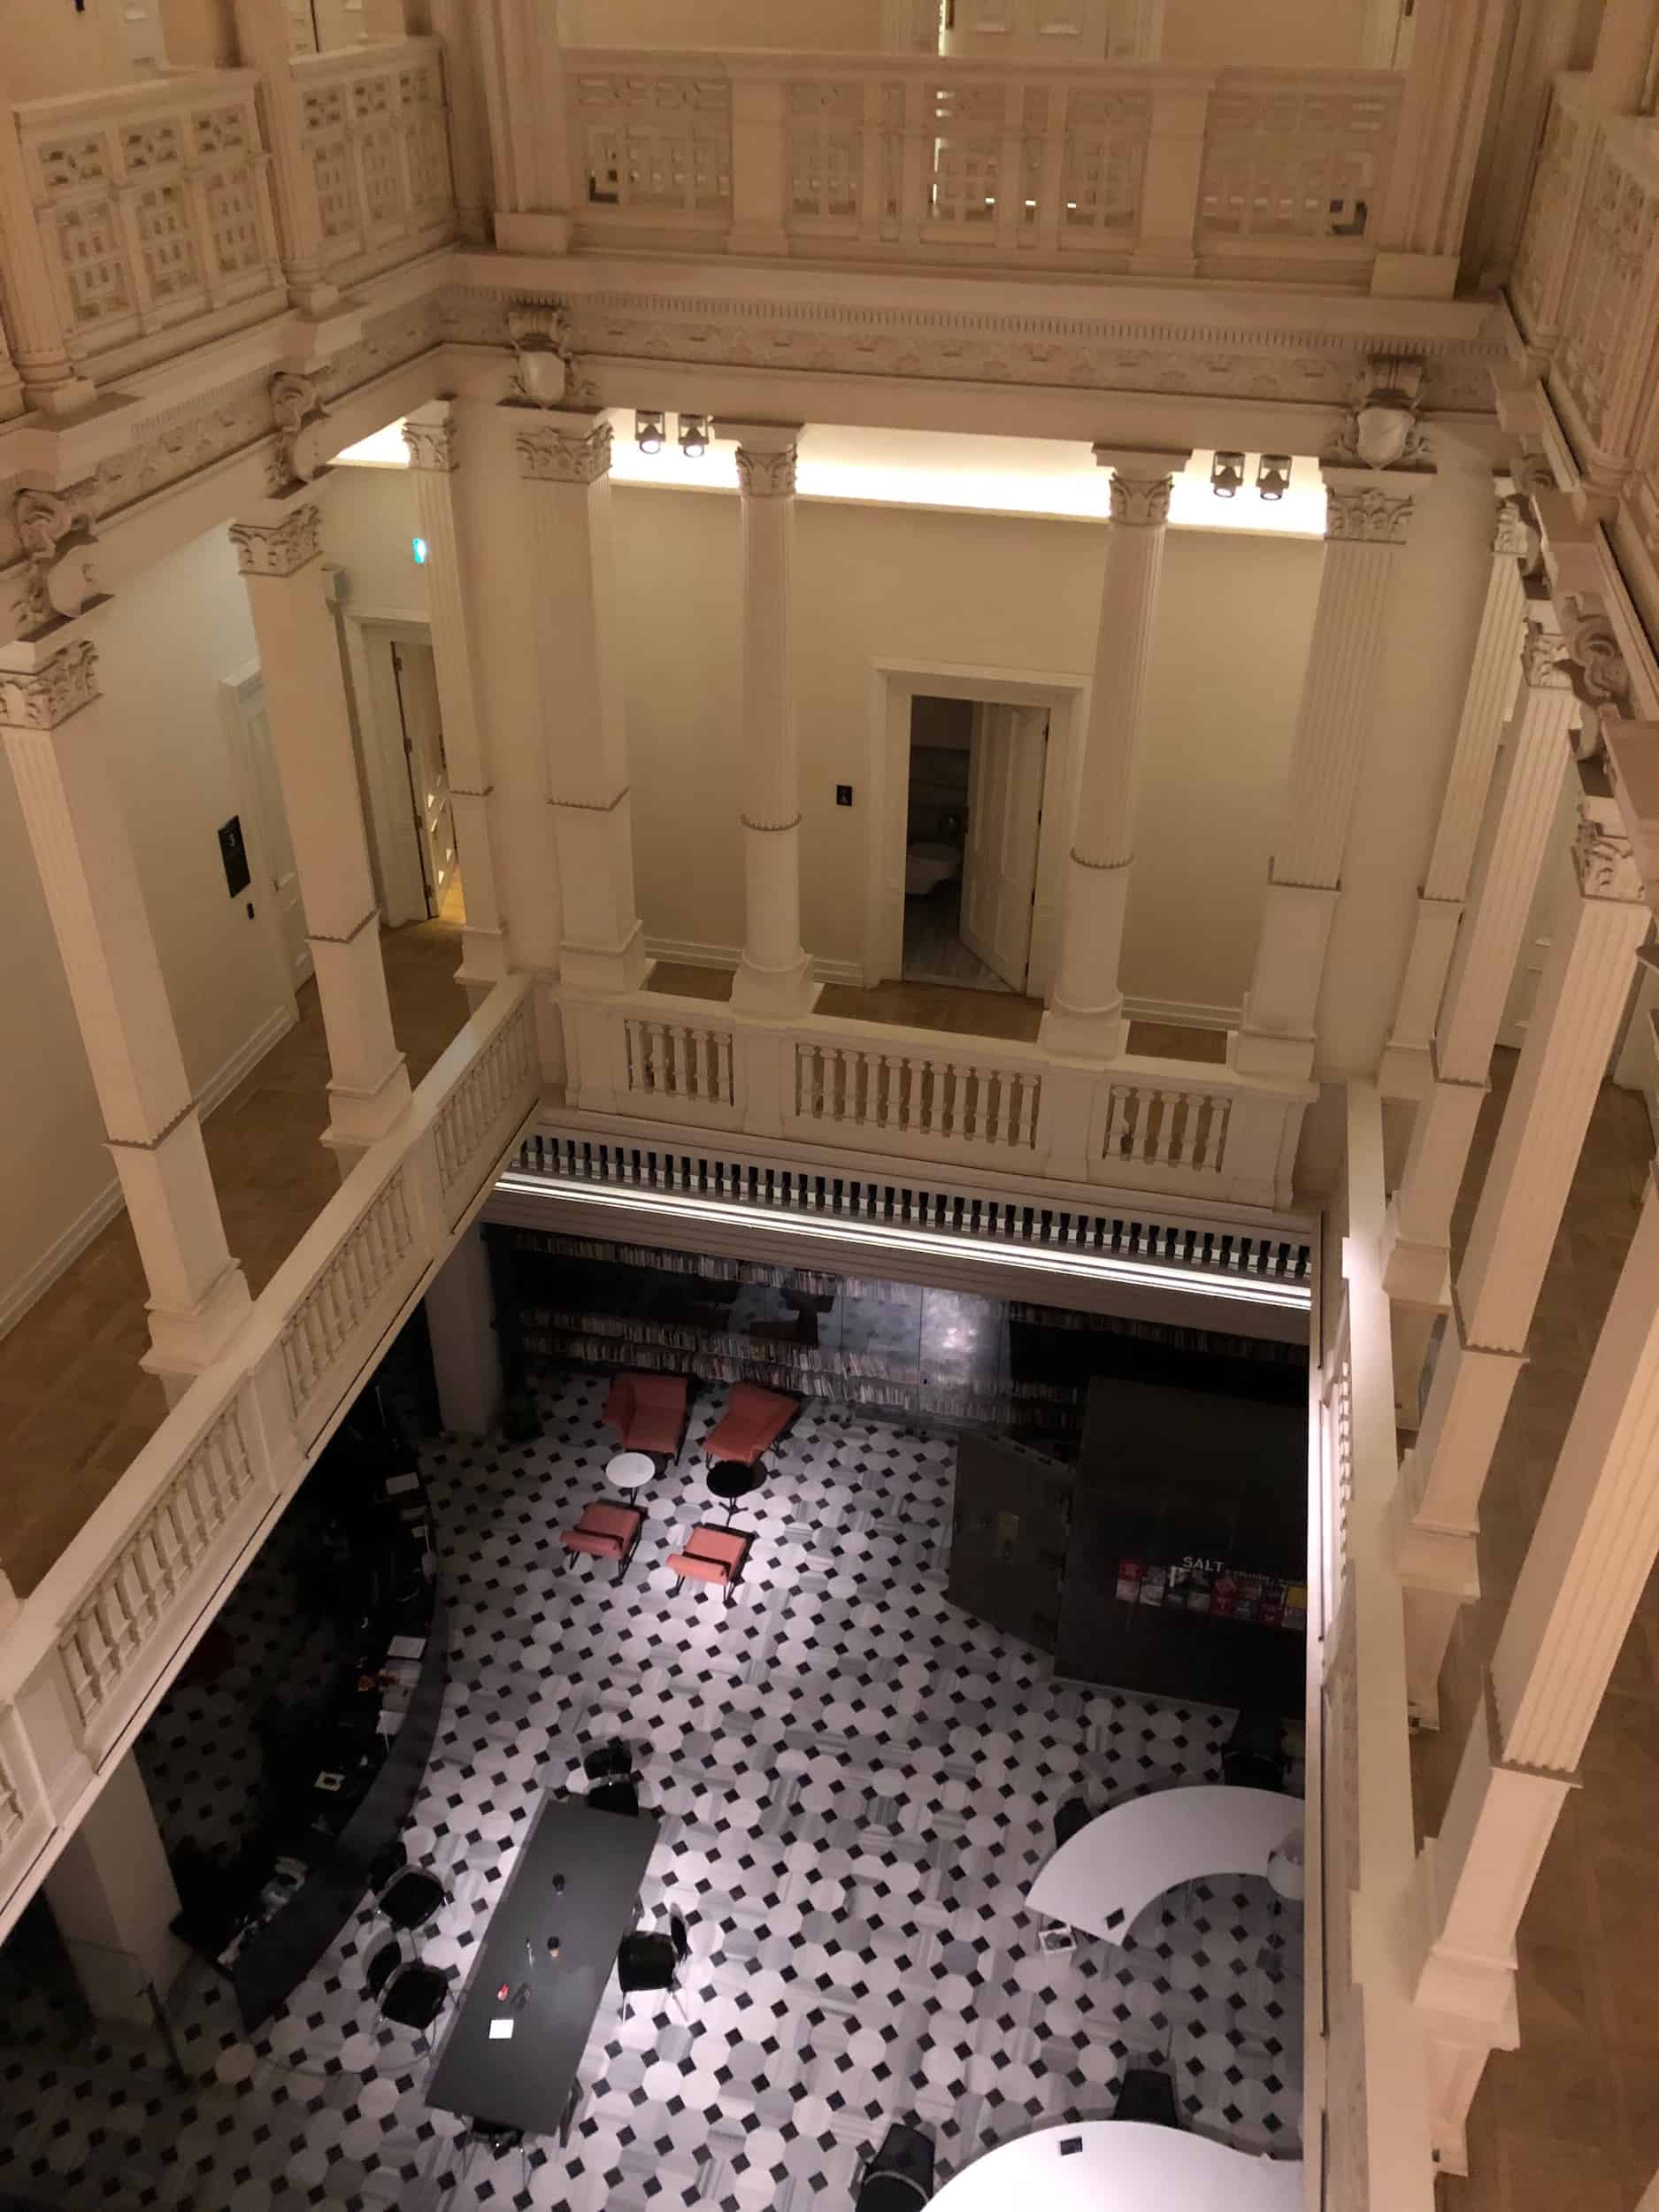 Looking down from the atrium in the Ottoman Bank Building